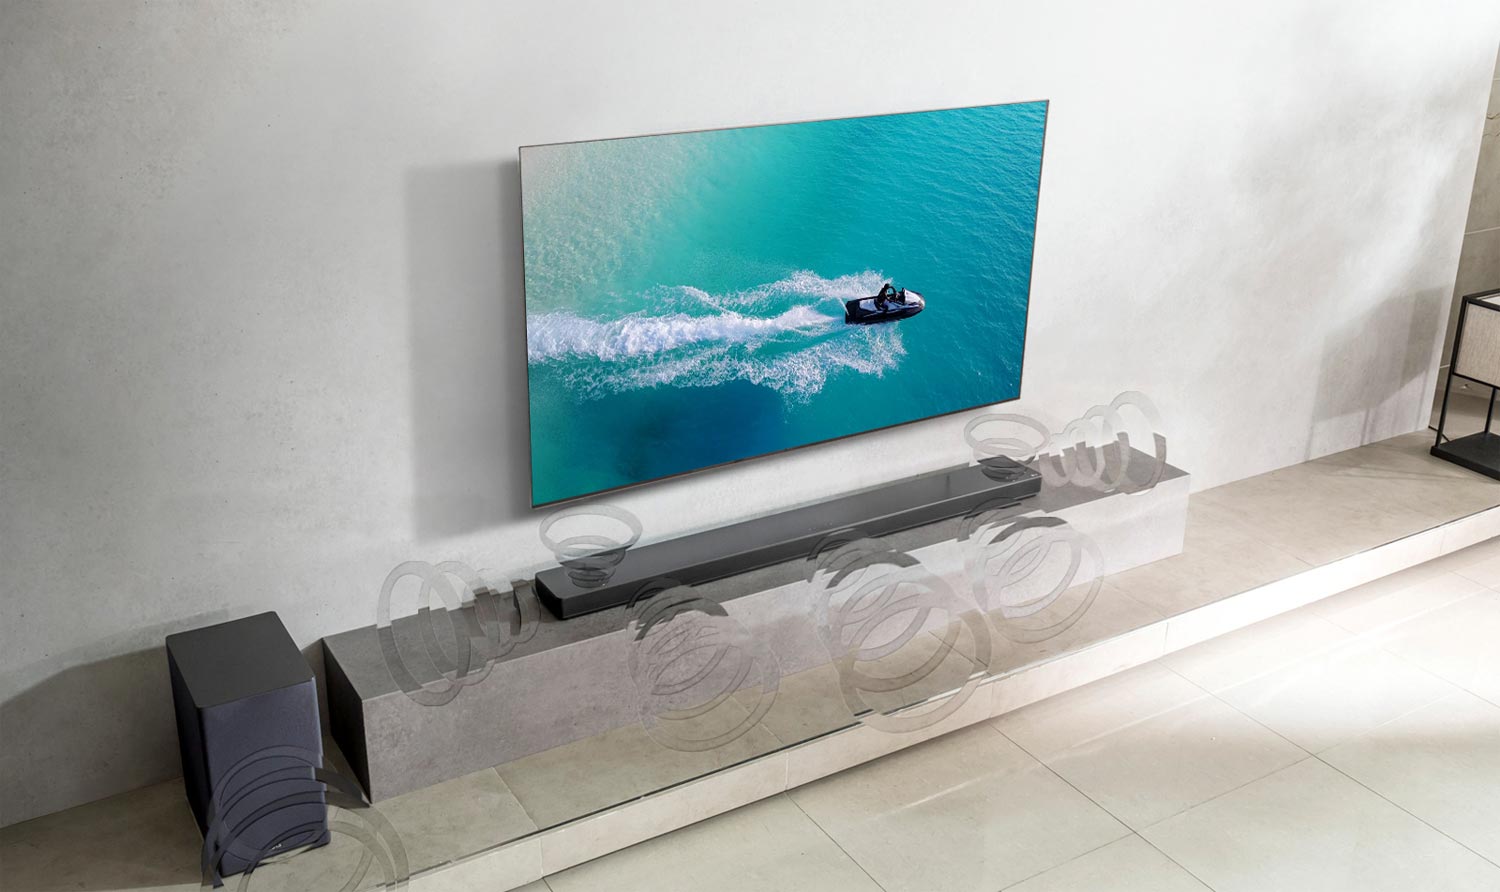 launches soundbars 3 with Dolby Atmos - FlatpanelsHD